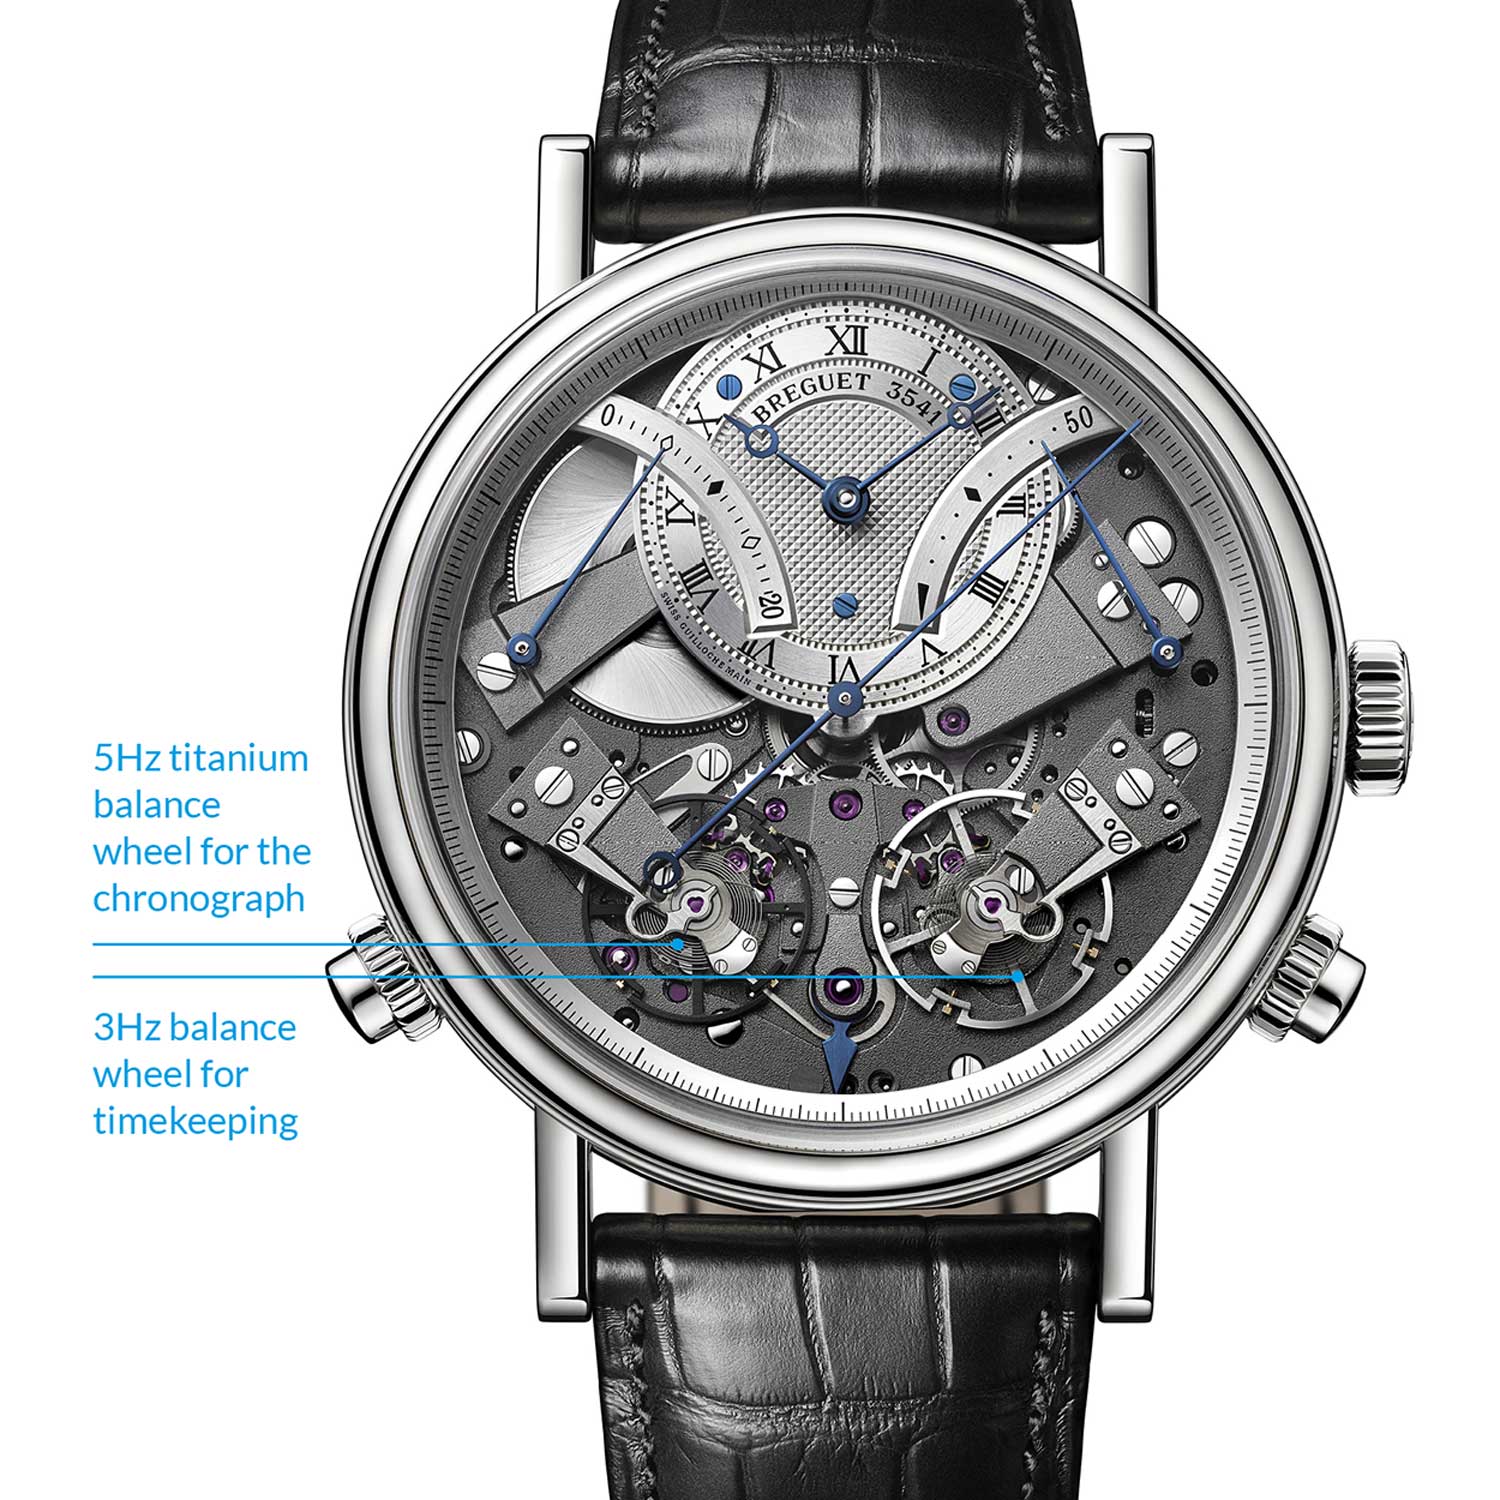 The Breguet Tradition Chronographe Indépendant 7077 with two independent transmission systems; one for timekeeping and one for the chronograph